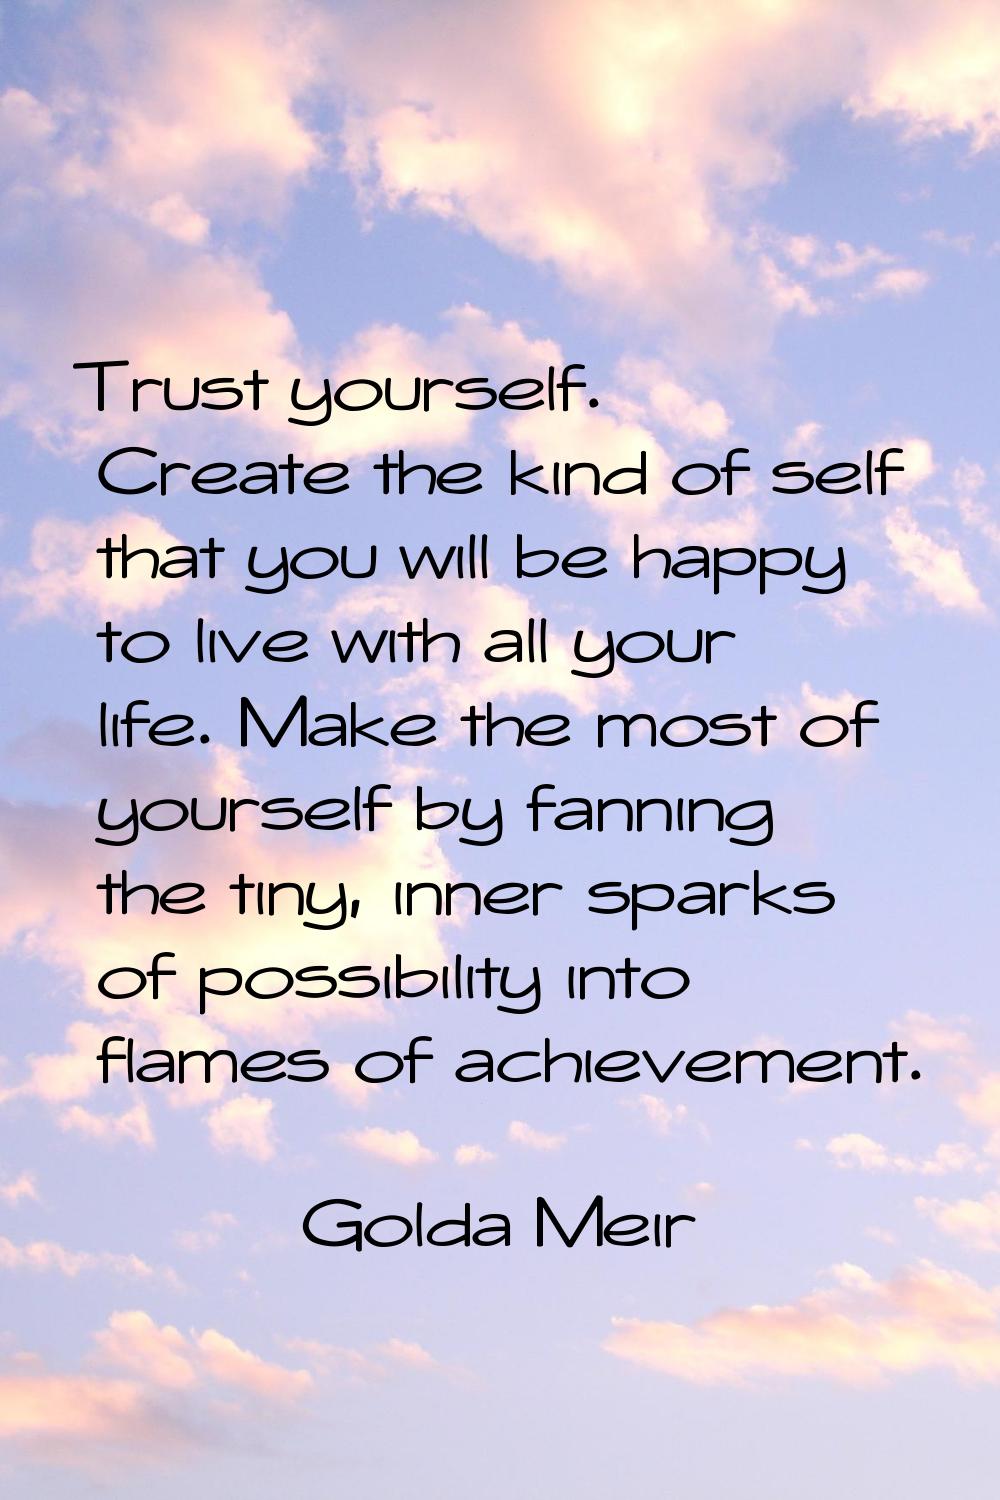 Trust yourself. Create the kind of self that you will be happy to live with all your life. Make the